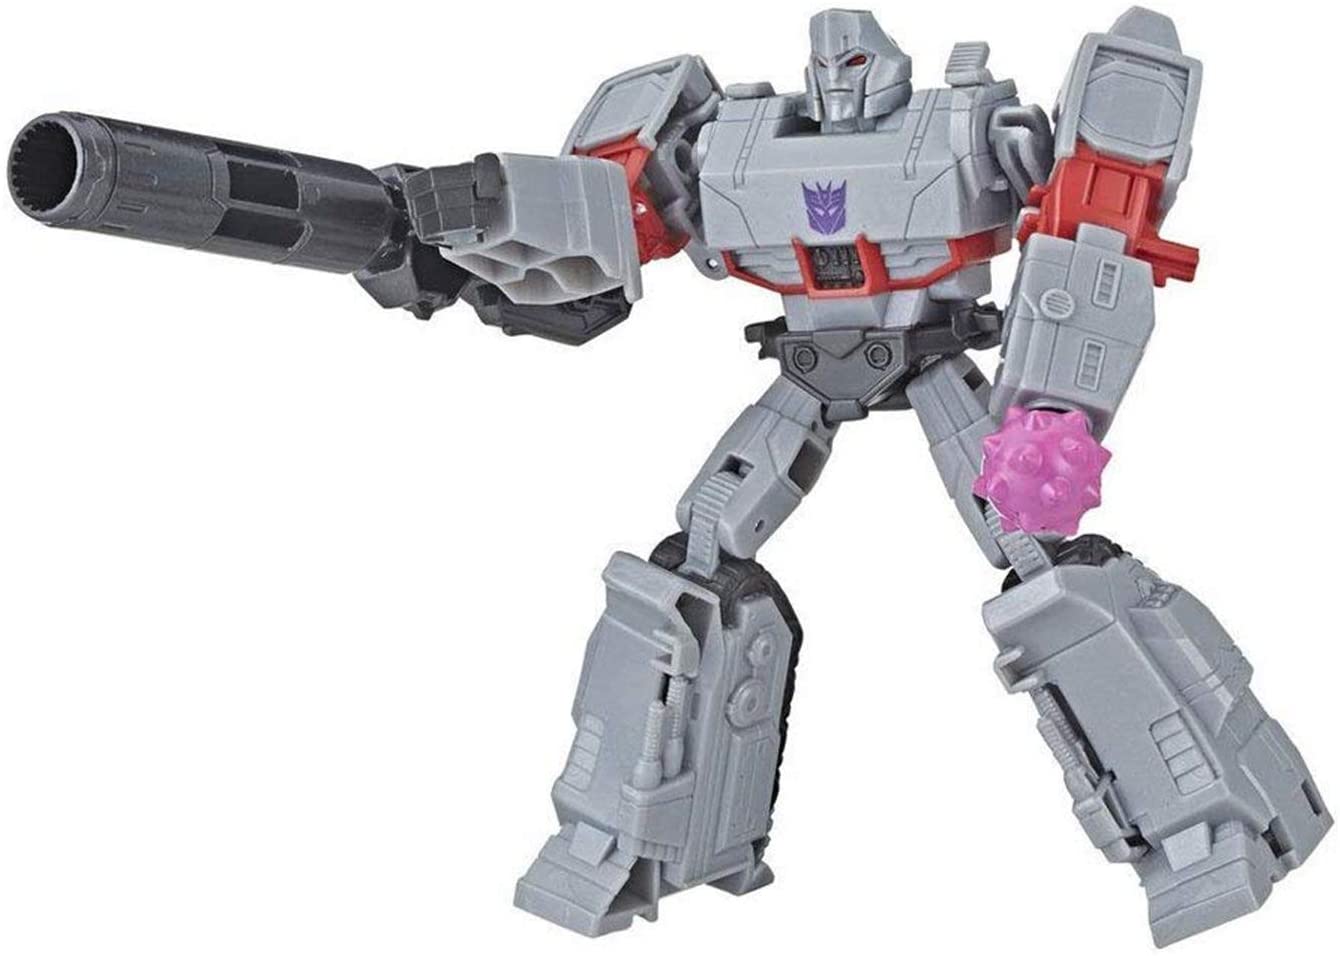 Transformers Cyberverse Action Attackers Warrior Megatron Figure